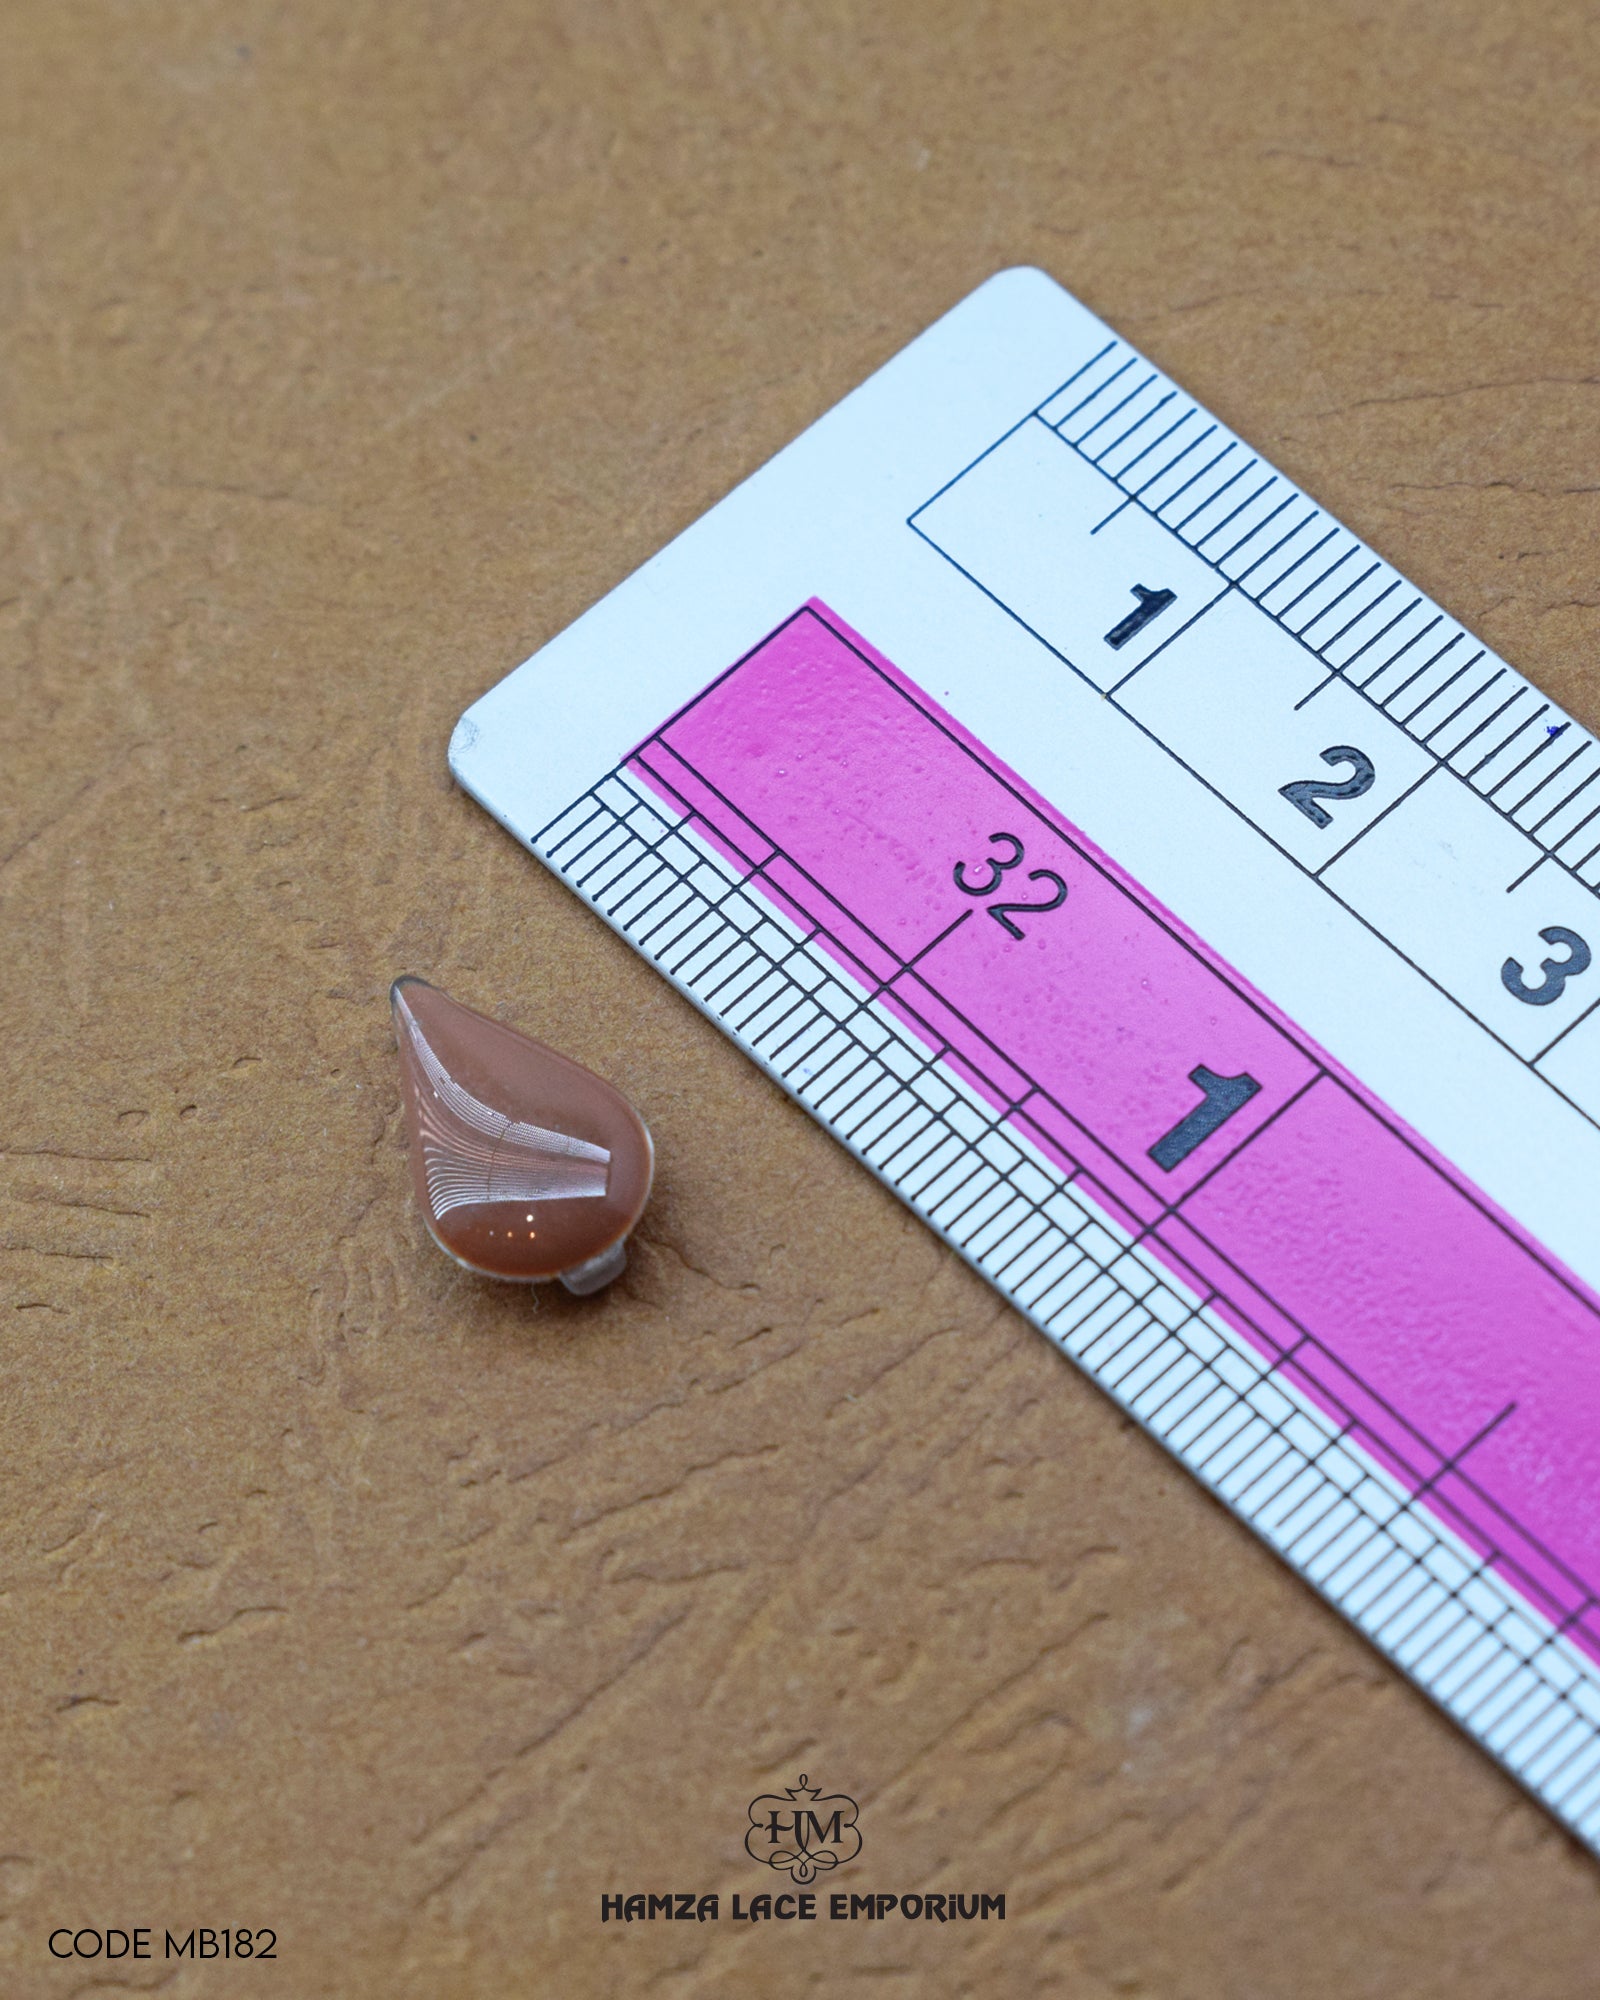 The size of the 'Drop Shape Metal Button MB182' is measured using a ruler.